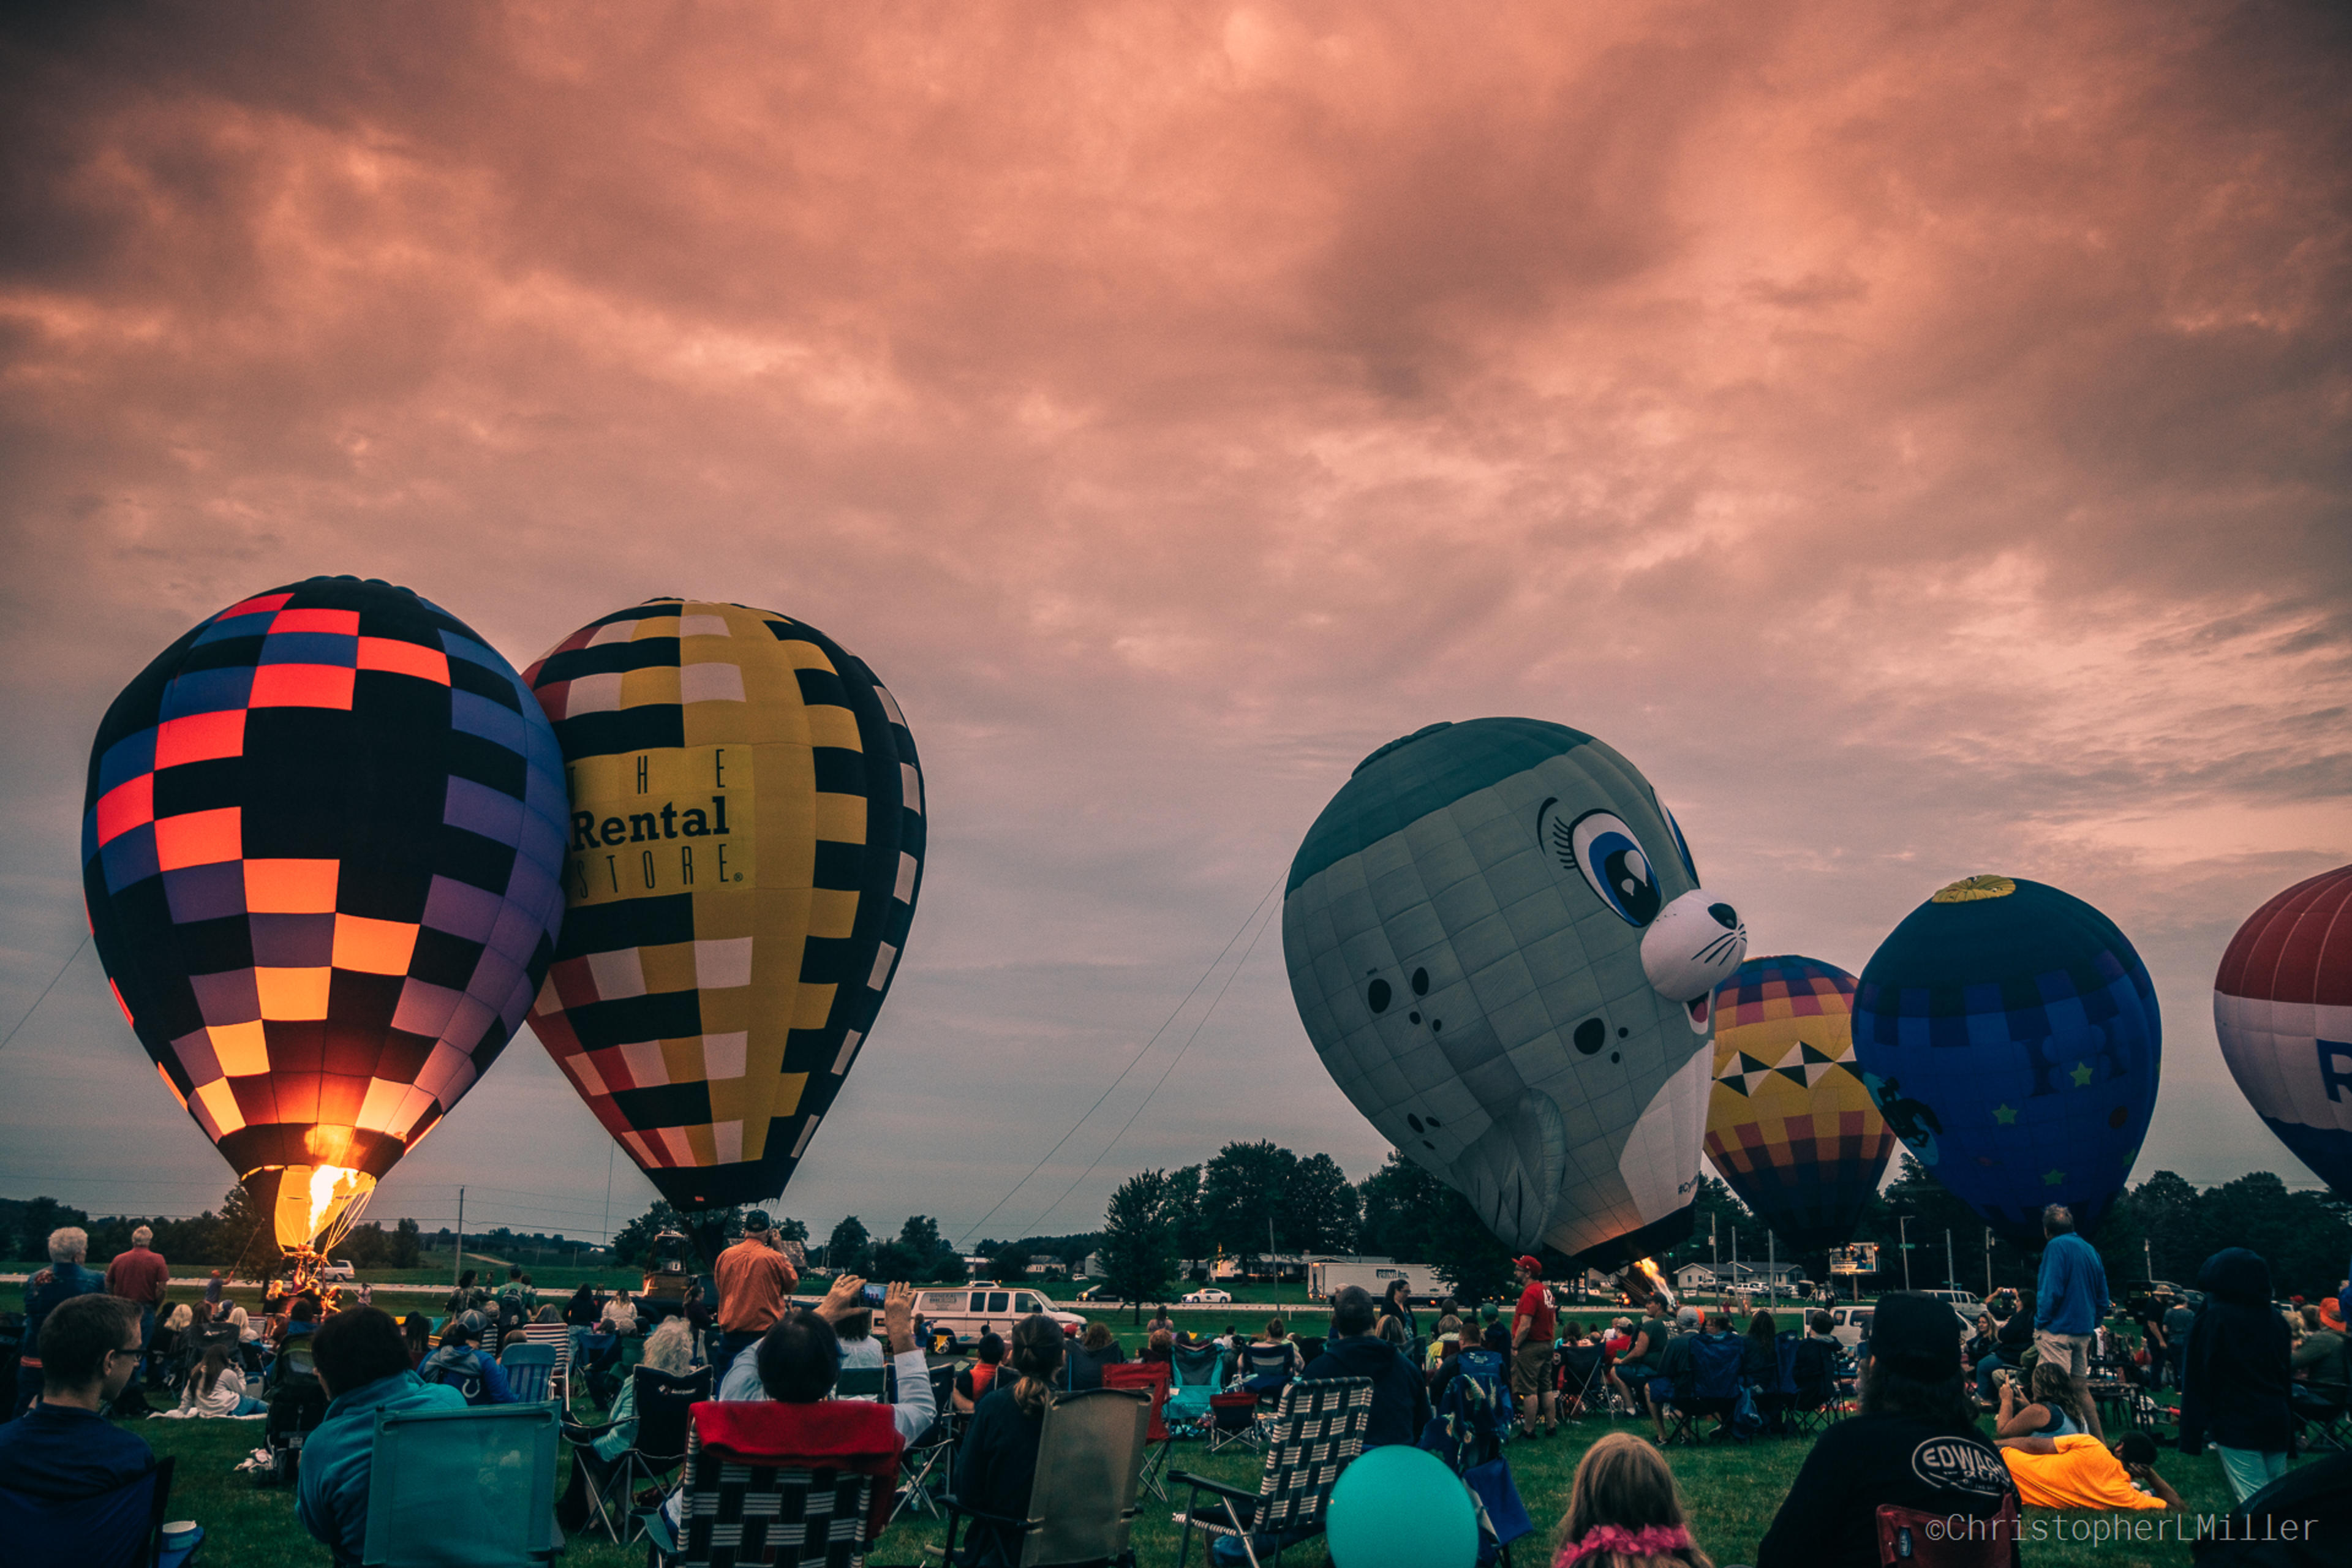 Dramatic Clouds with some Glowing Balloons